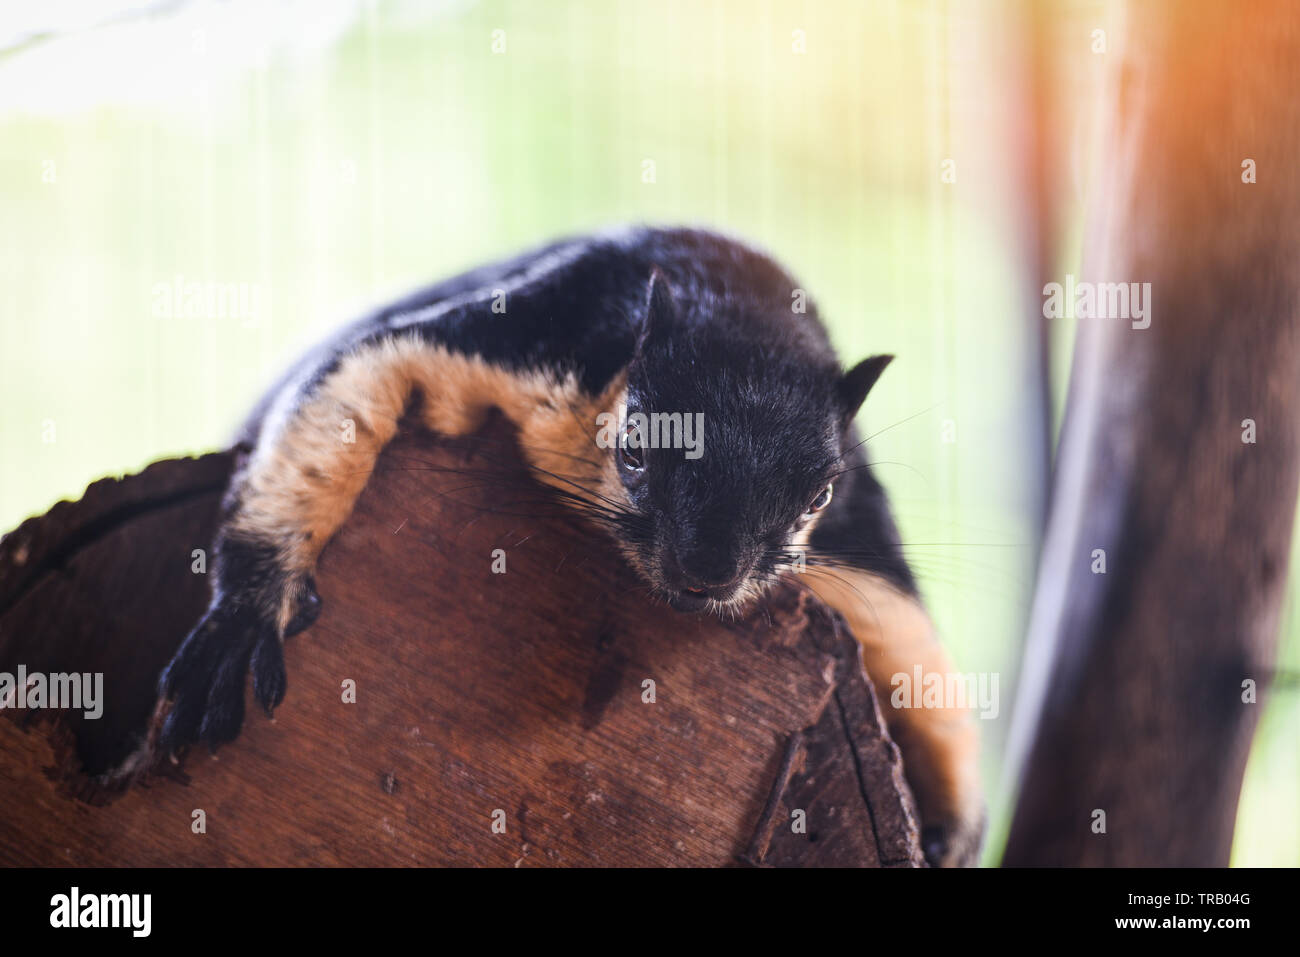 Black giant squirrel / Malayan giant squirrel Stock Photo